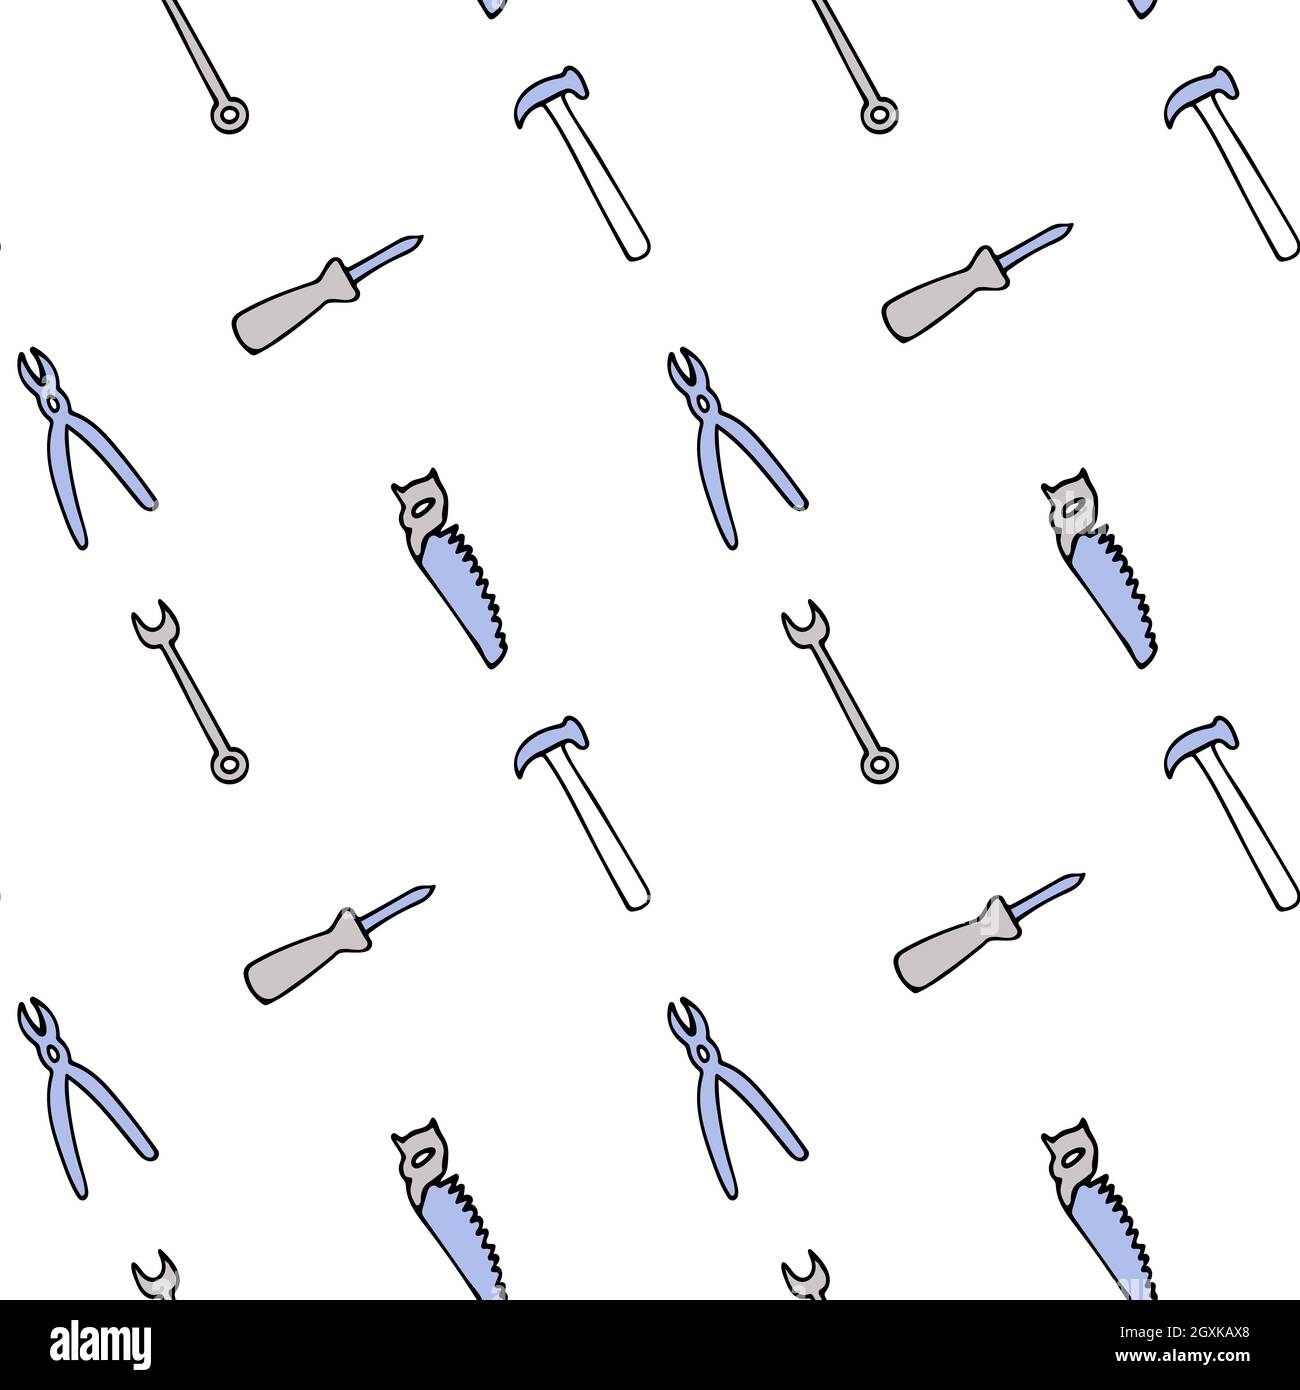 Seamless pattern with repair tools, screwdriver, pliers, saw, hammer, adjustable wrench.  Stock Vector